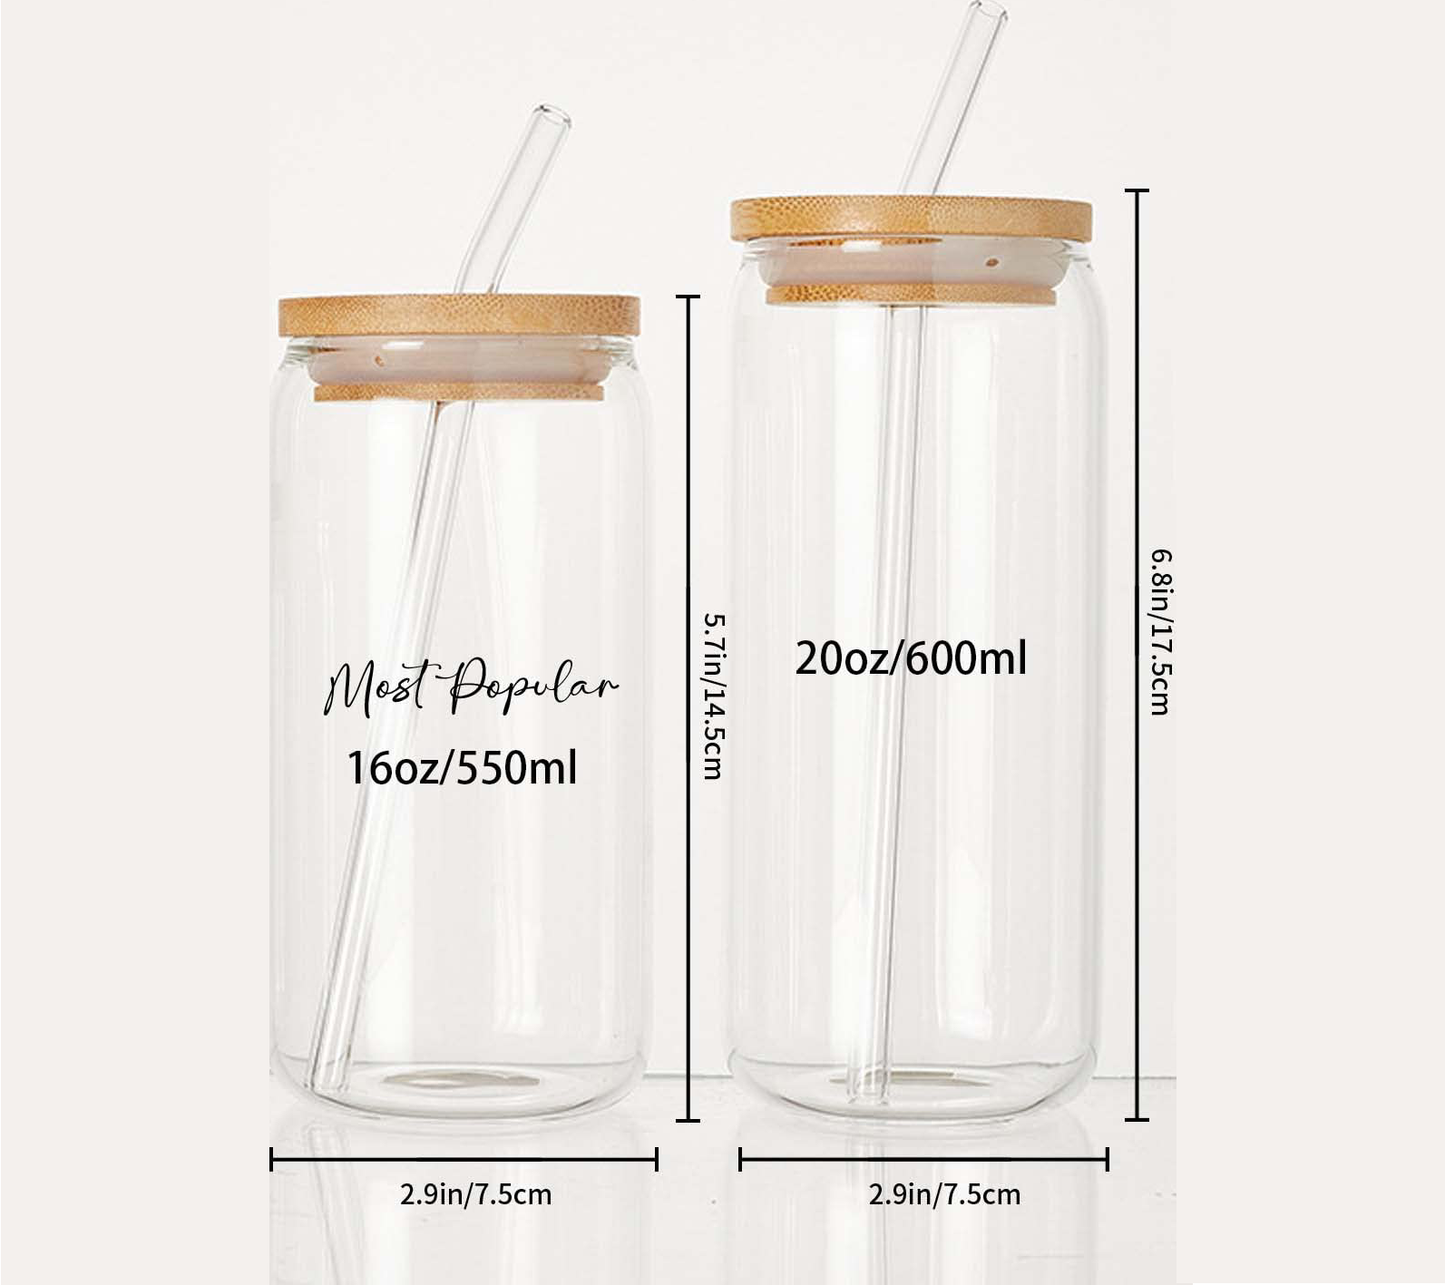 50% OFF❤️First Mom Now Grandma-Birth Flower Family Personalized Iced Coffee Glass Tumbler